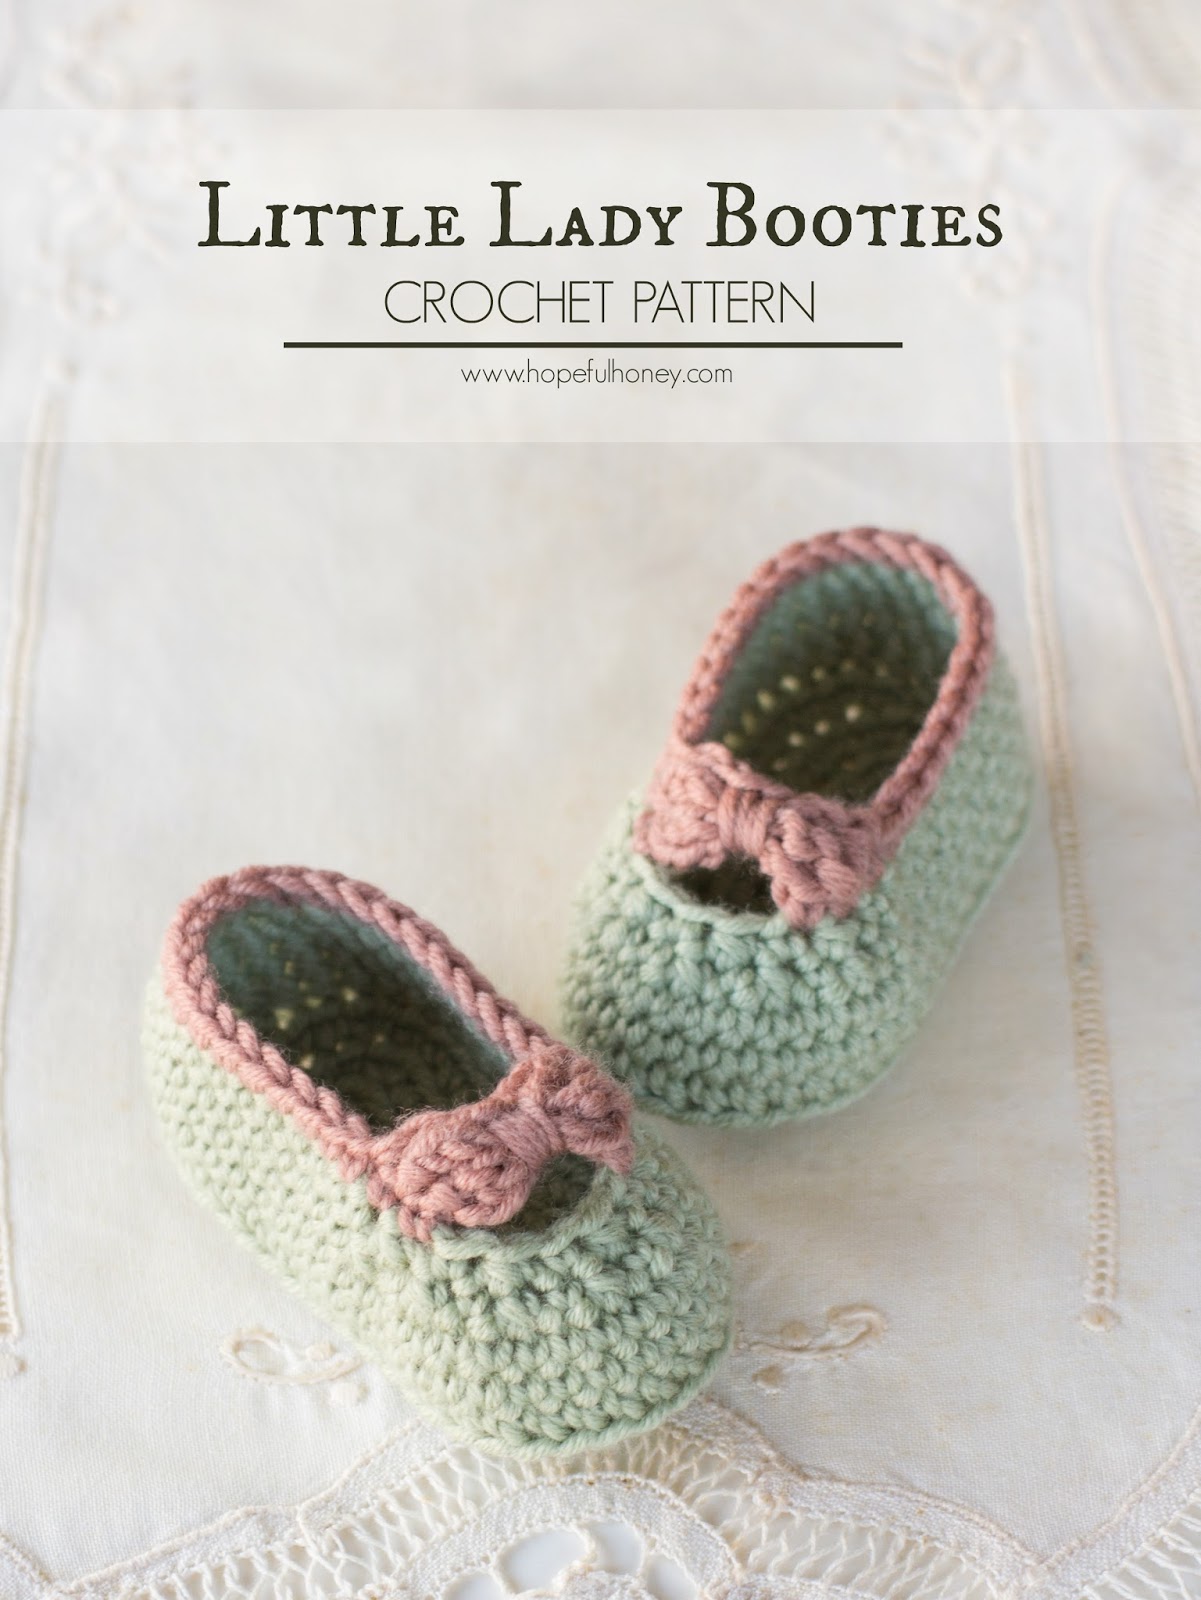 How do you find free bootie patterns?